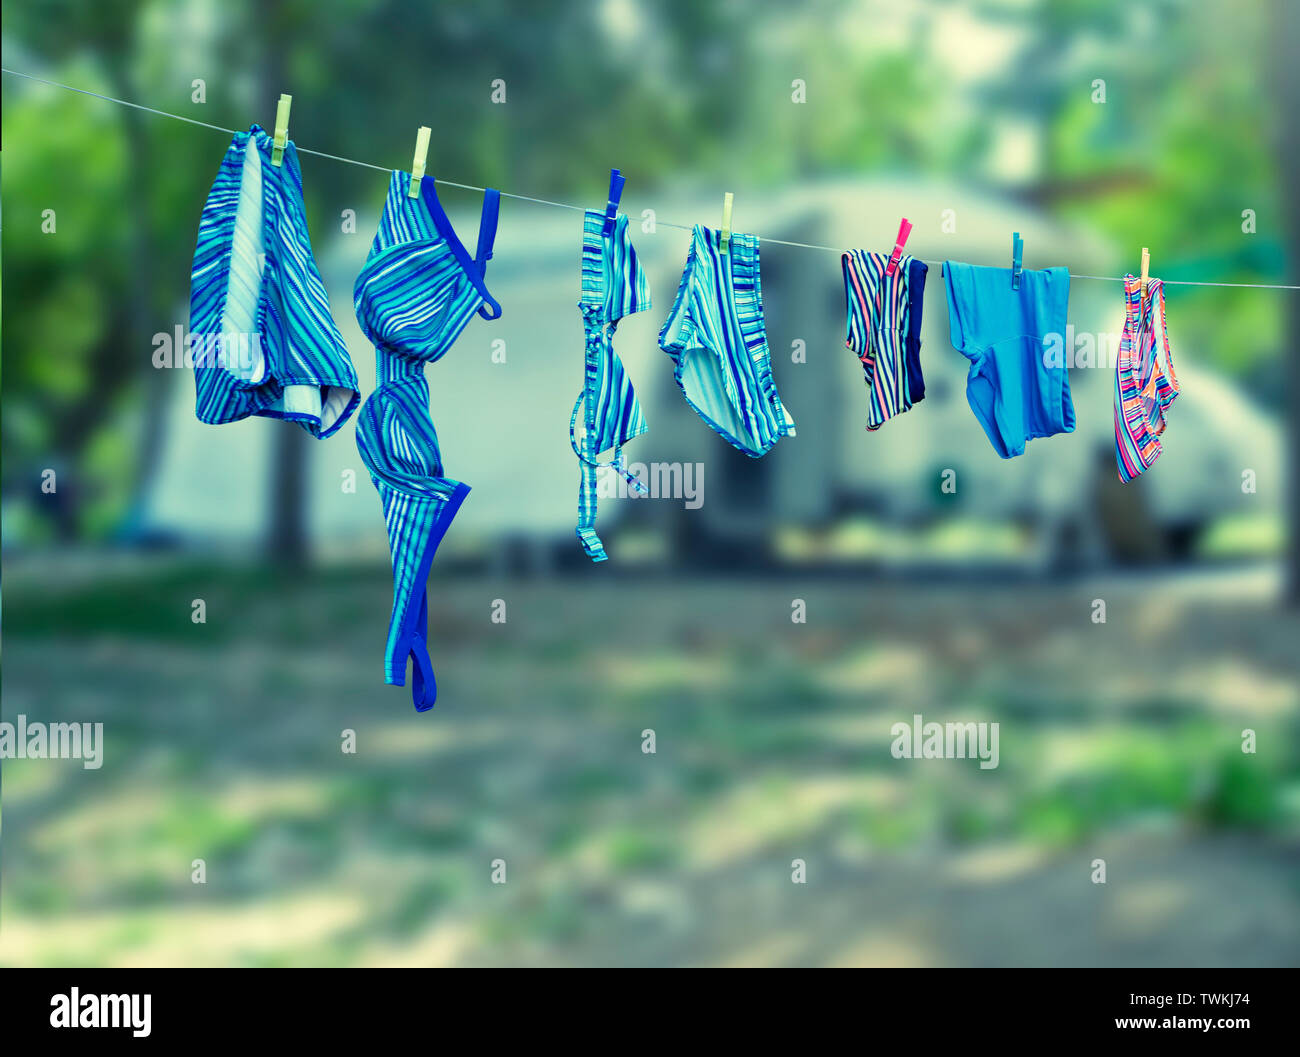 Swimsuit laundry on the clothes line Stock Photo